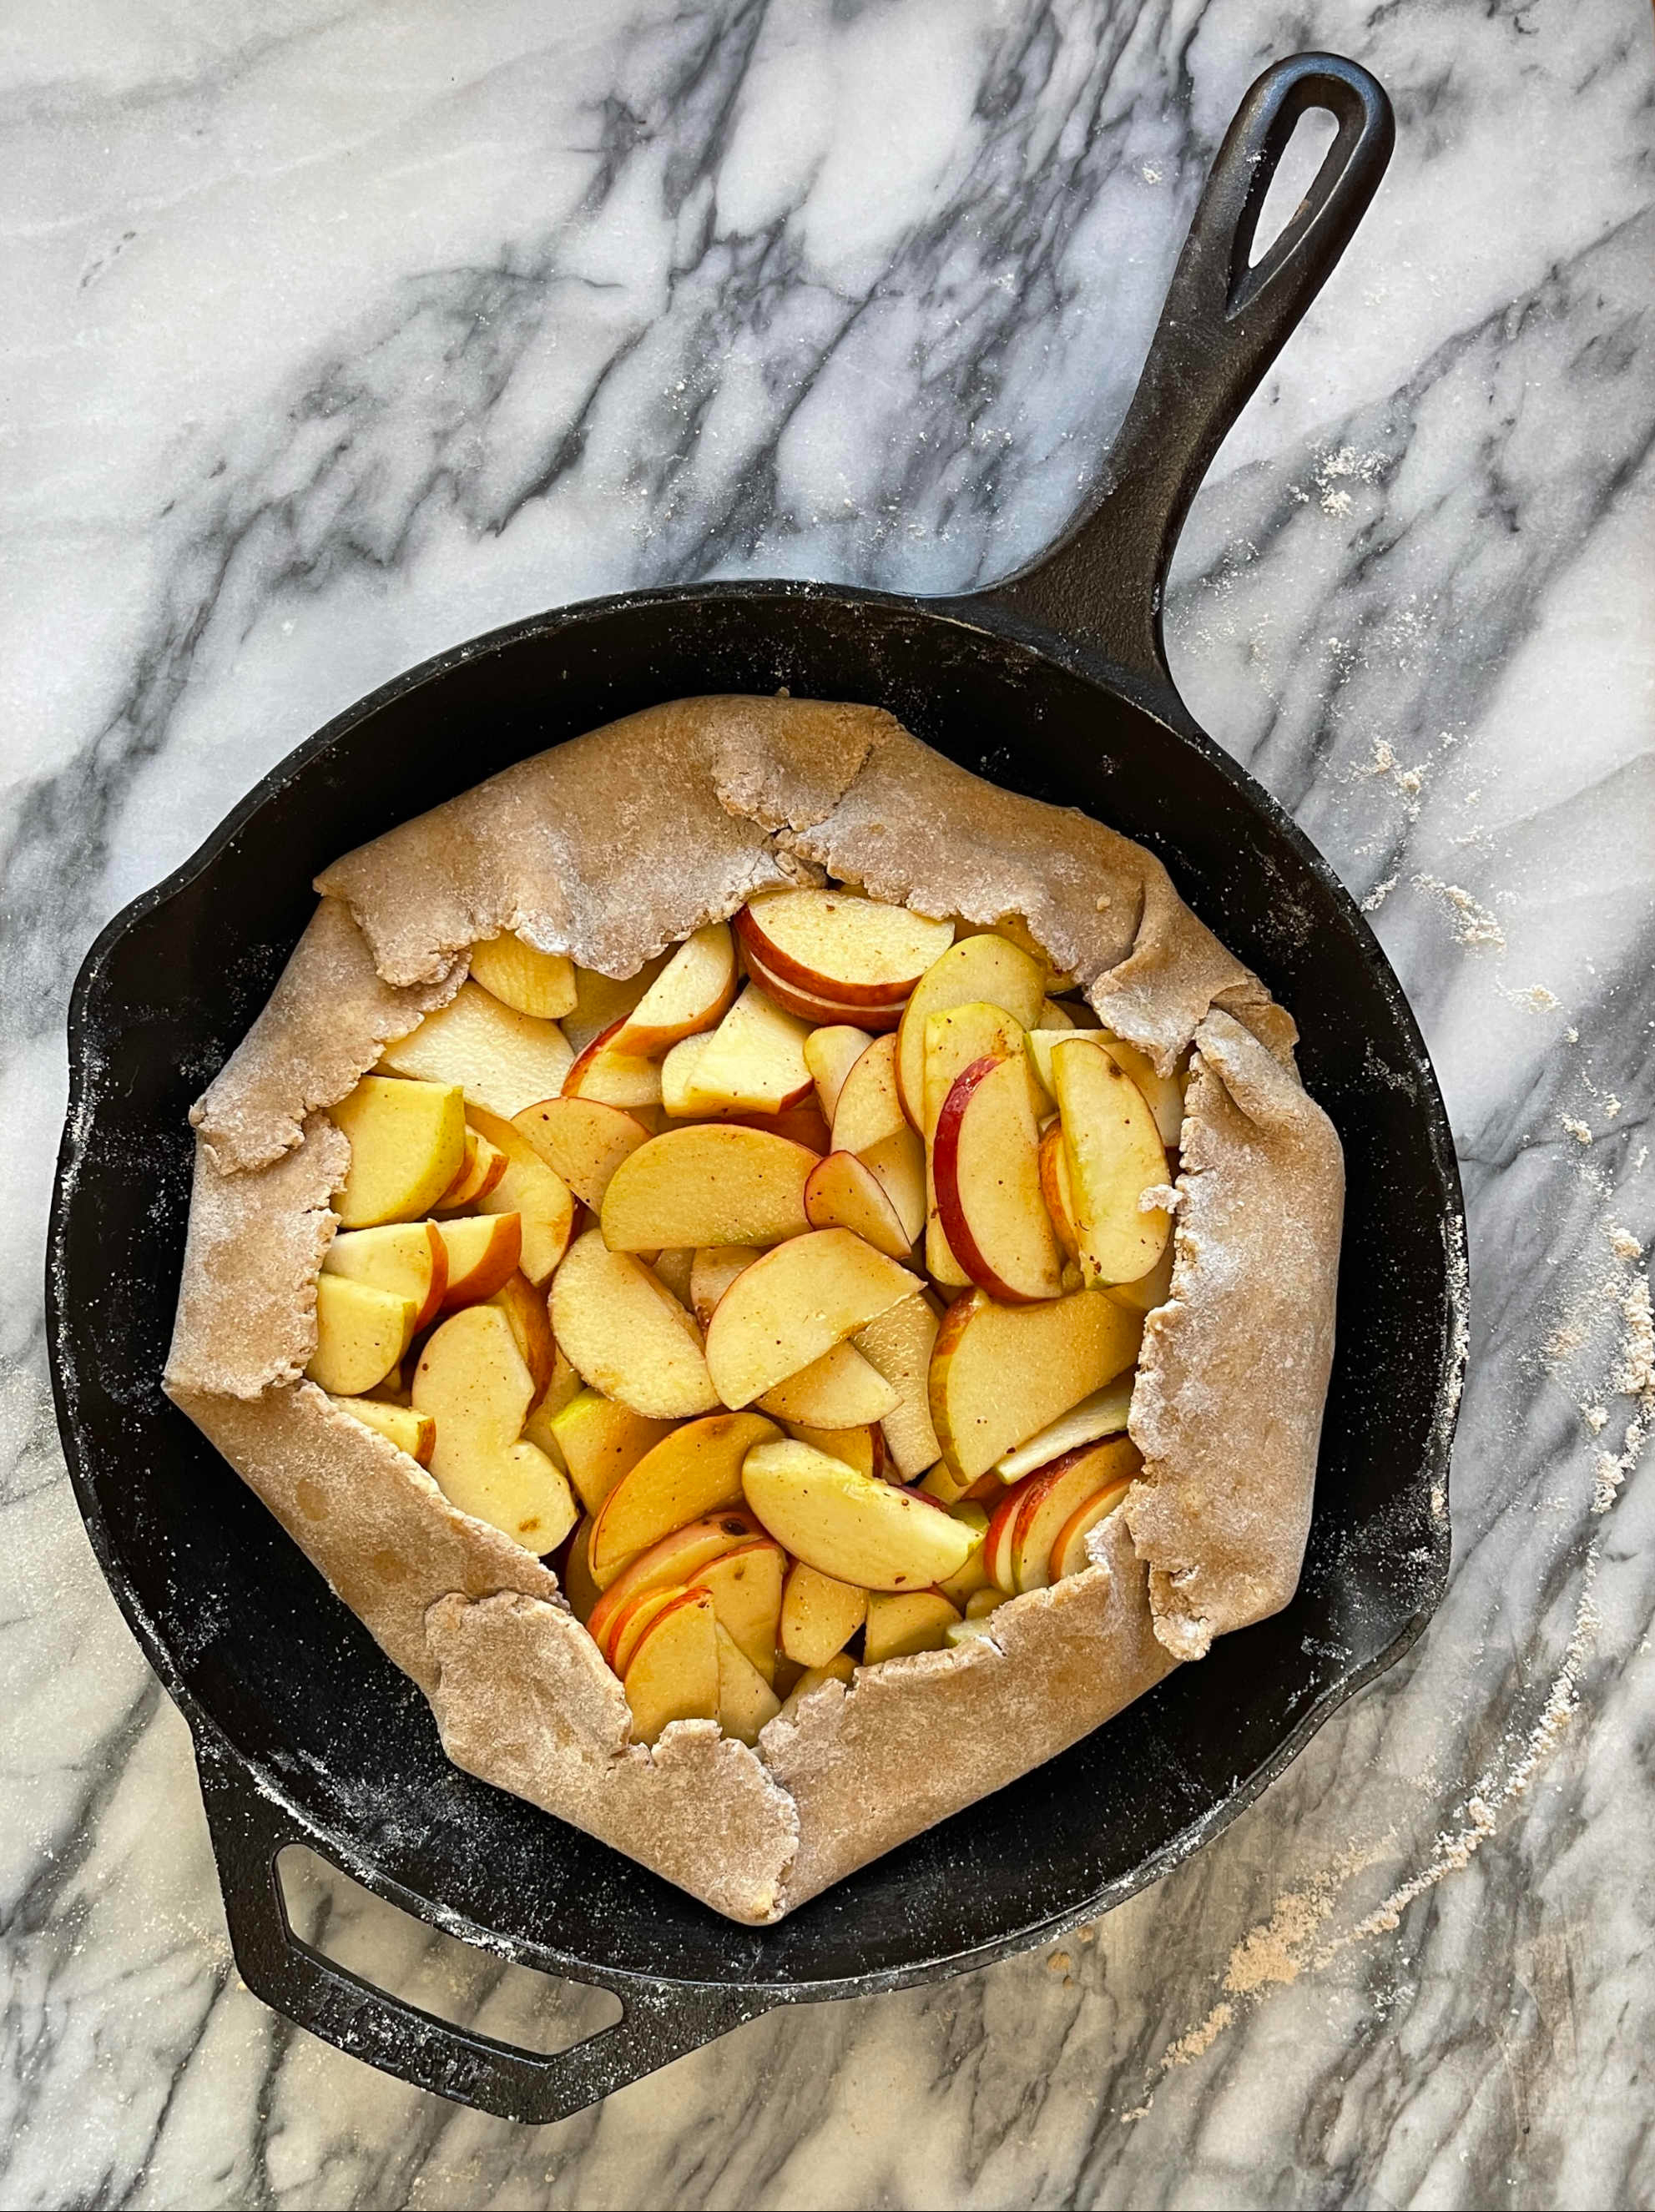 An apple galette in a cast iron pan is ready to bake. The pan sits on grey and white marble.